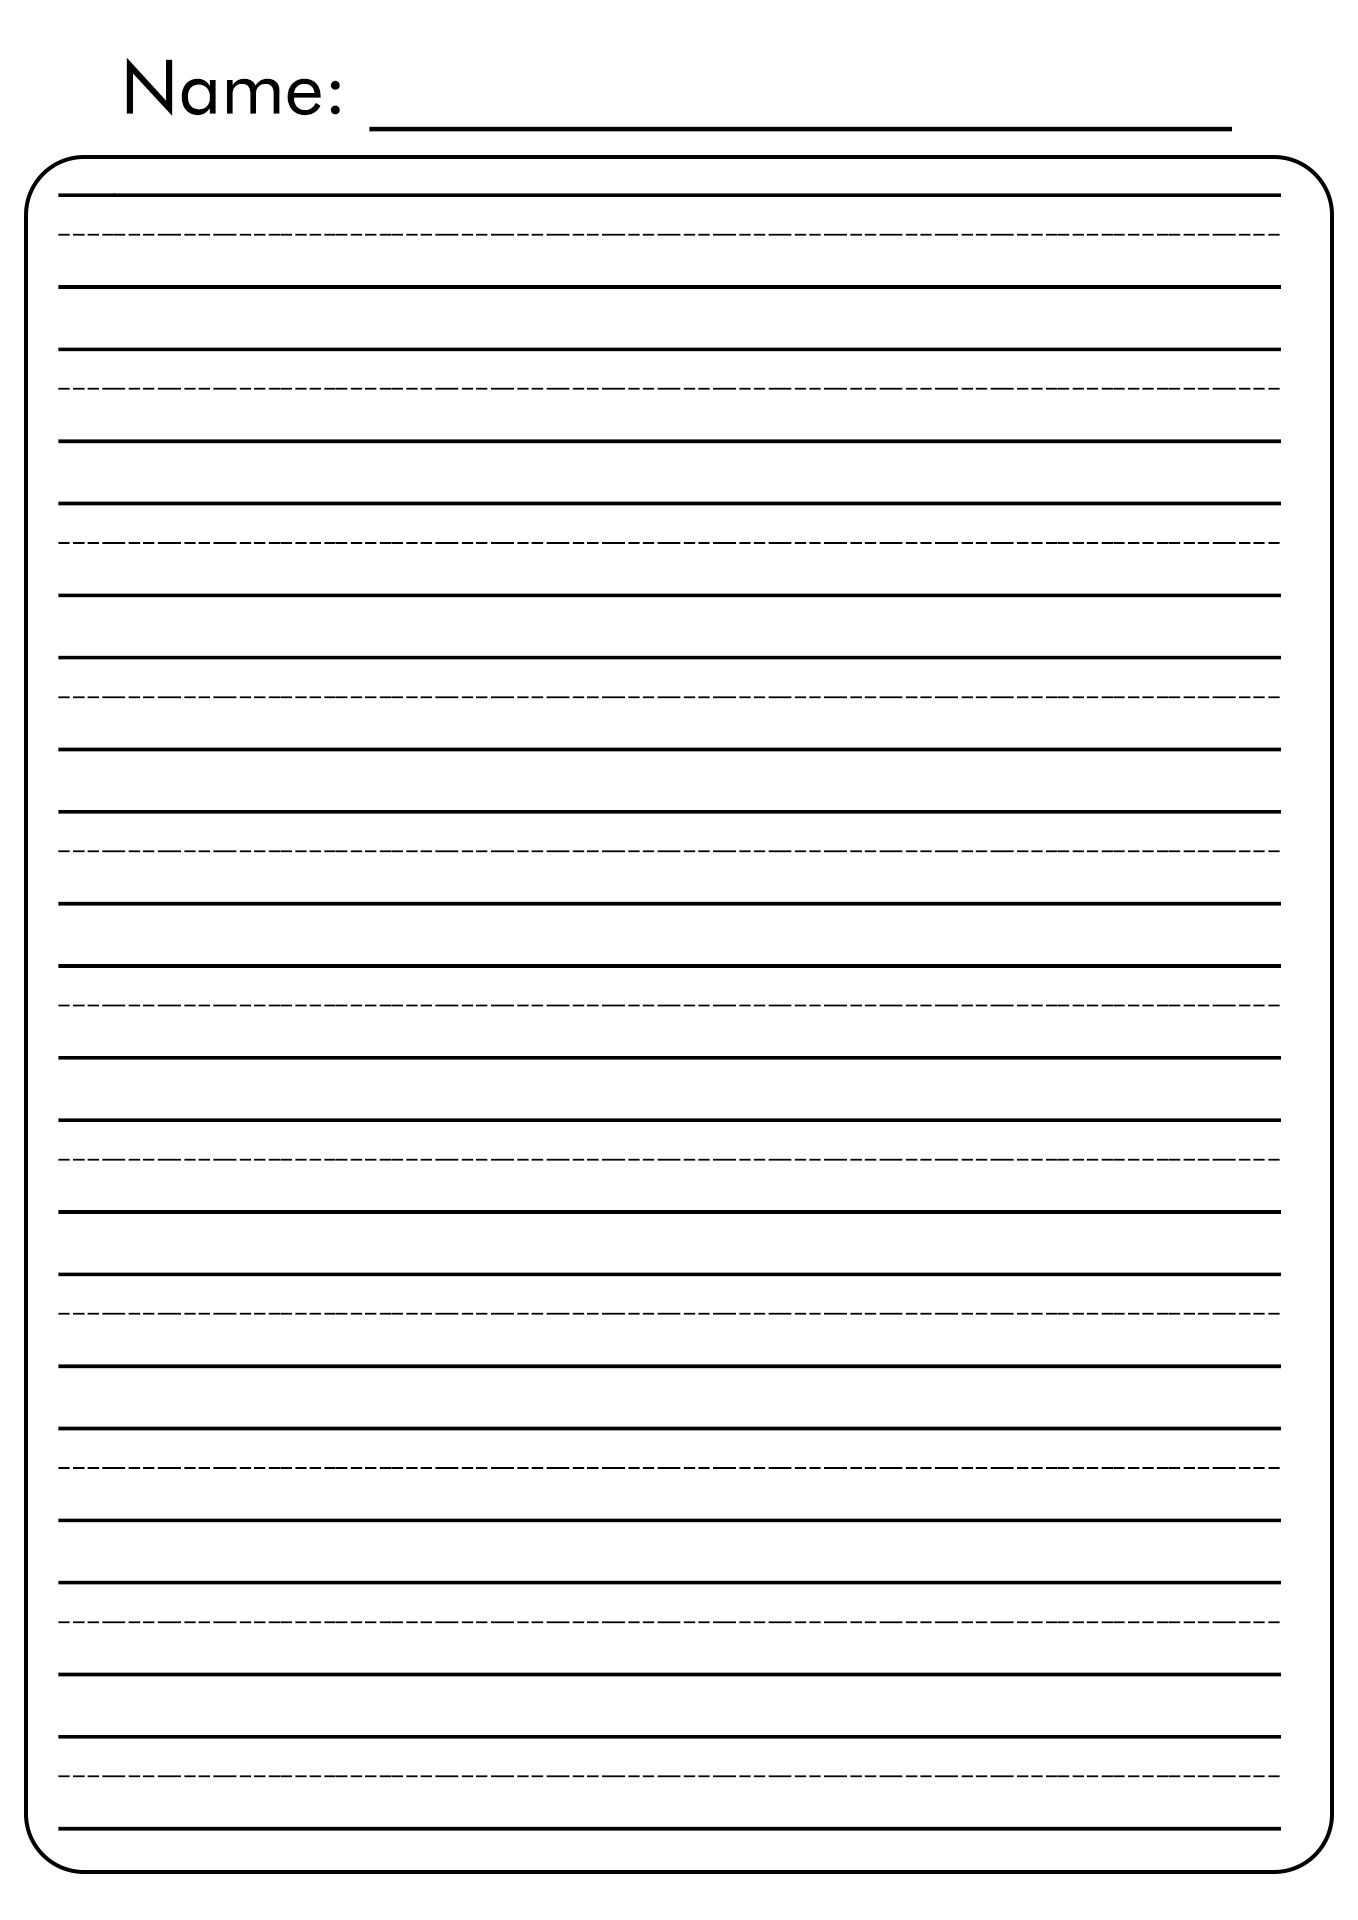 12 Best Images of First Grade Handwriting Practice Worksheets - 1st